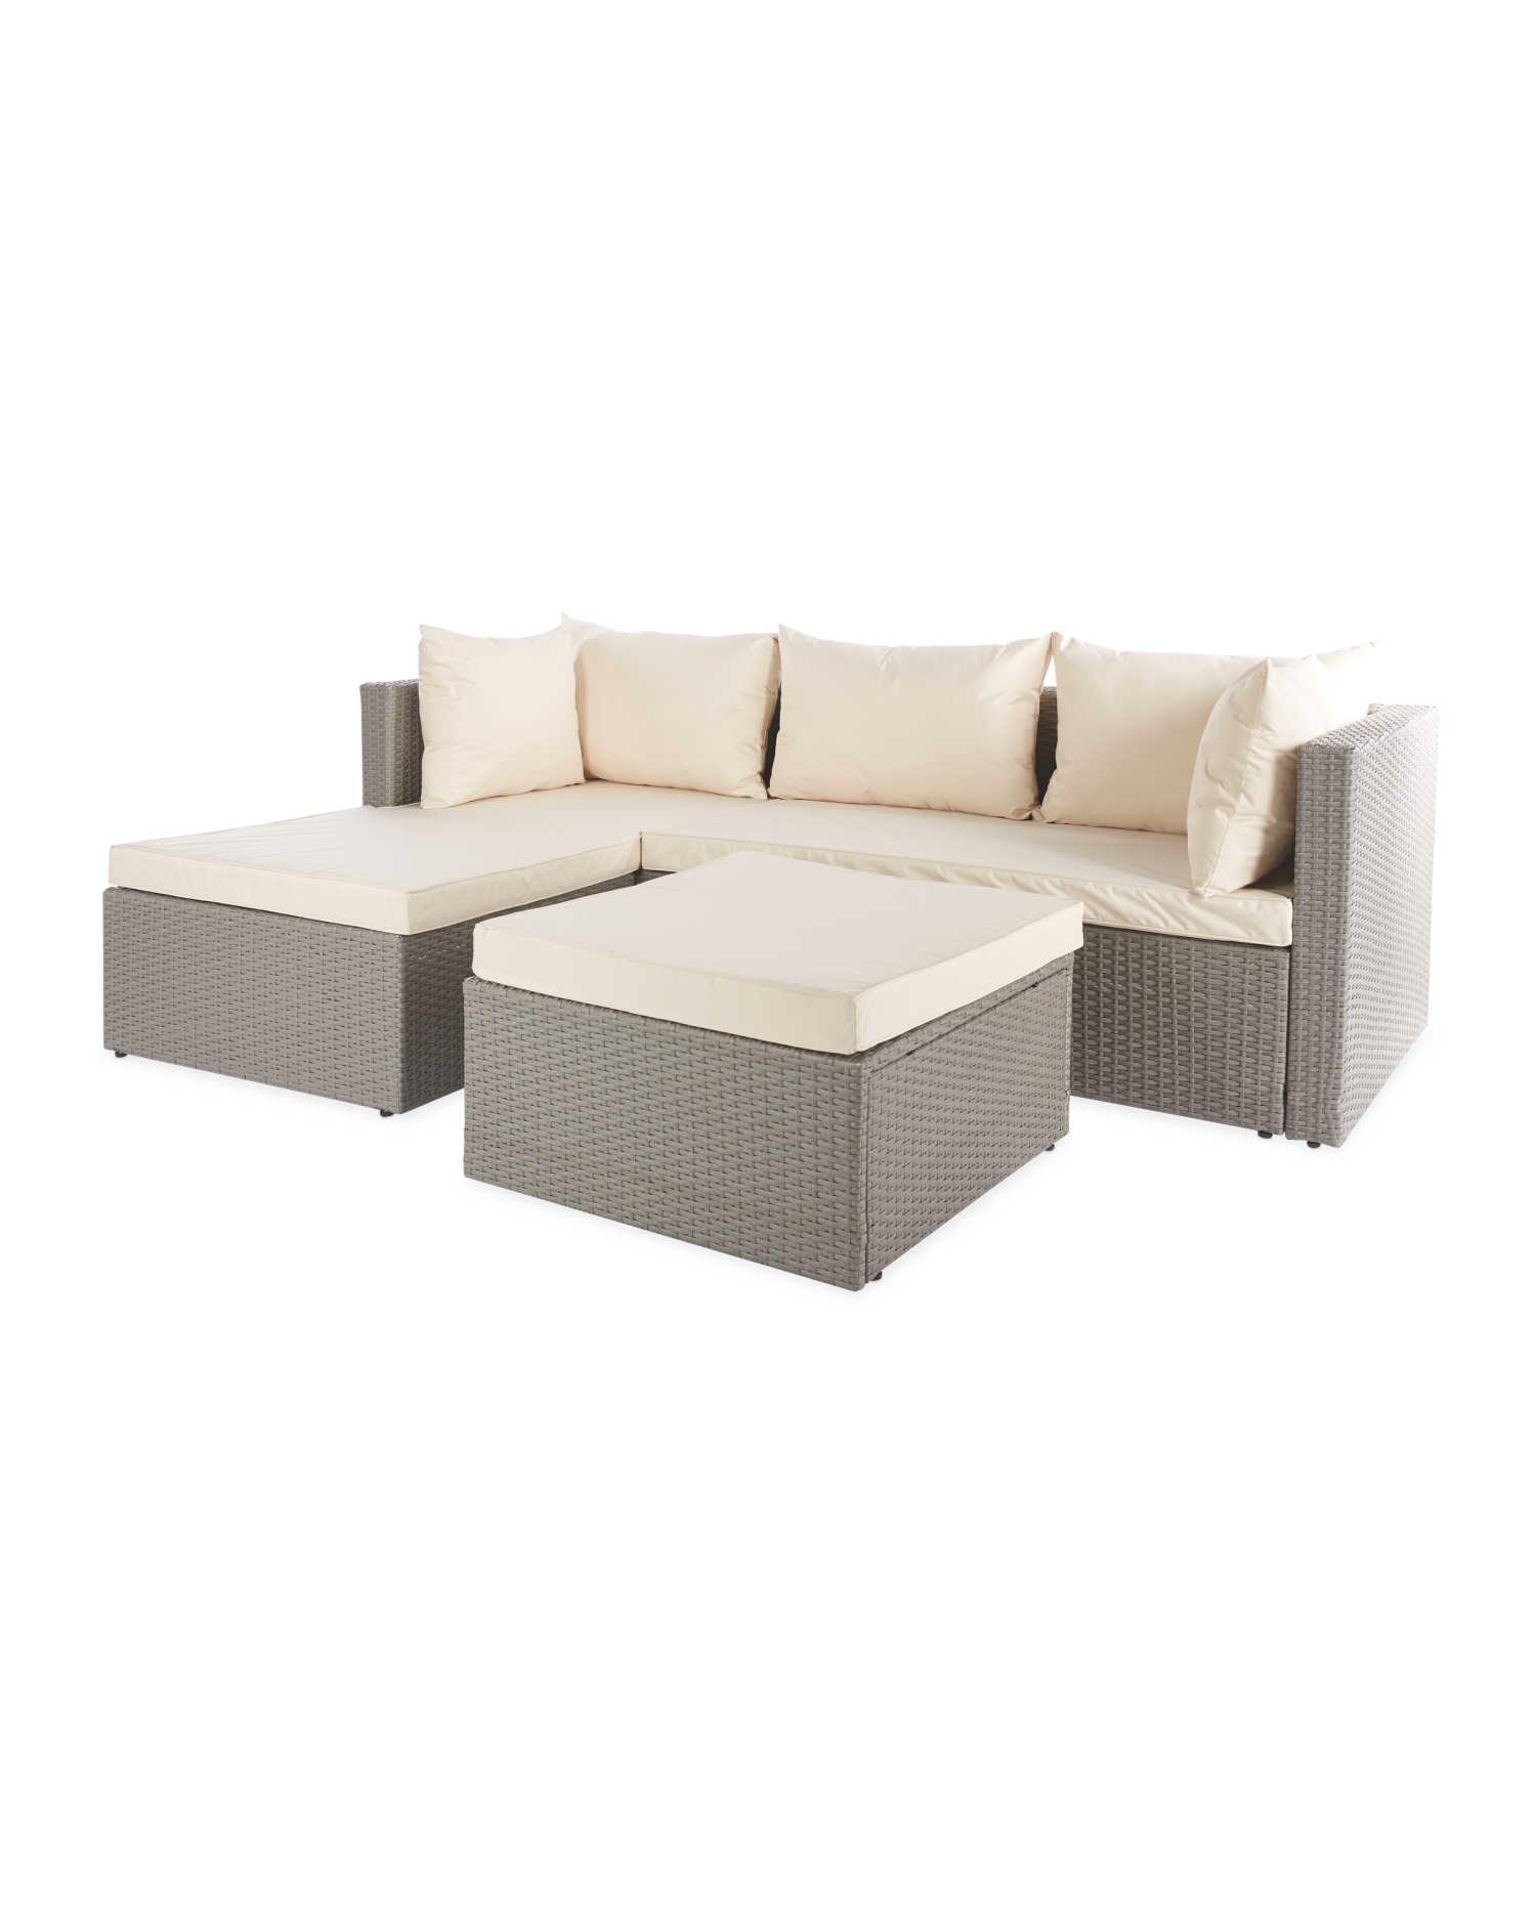 New & Boxed Luxury Grey & Cream Corner Sofa Set. Soak in the sun and feel that summer breeze while - Image 4 of 4